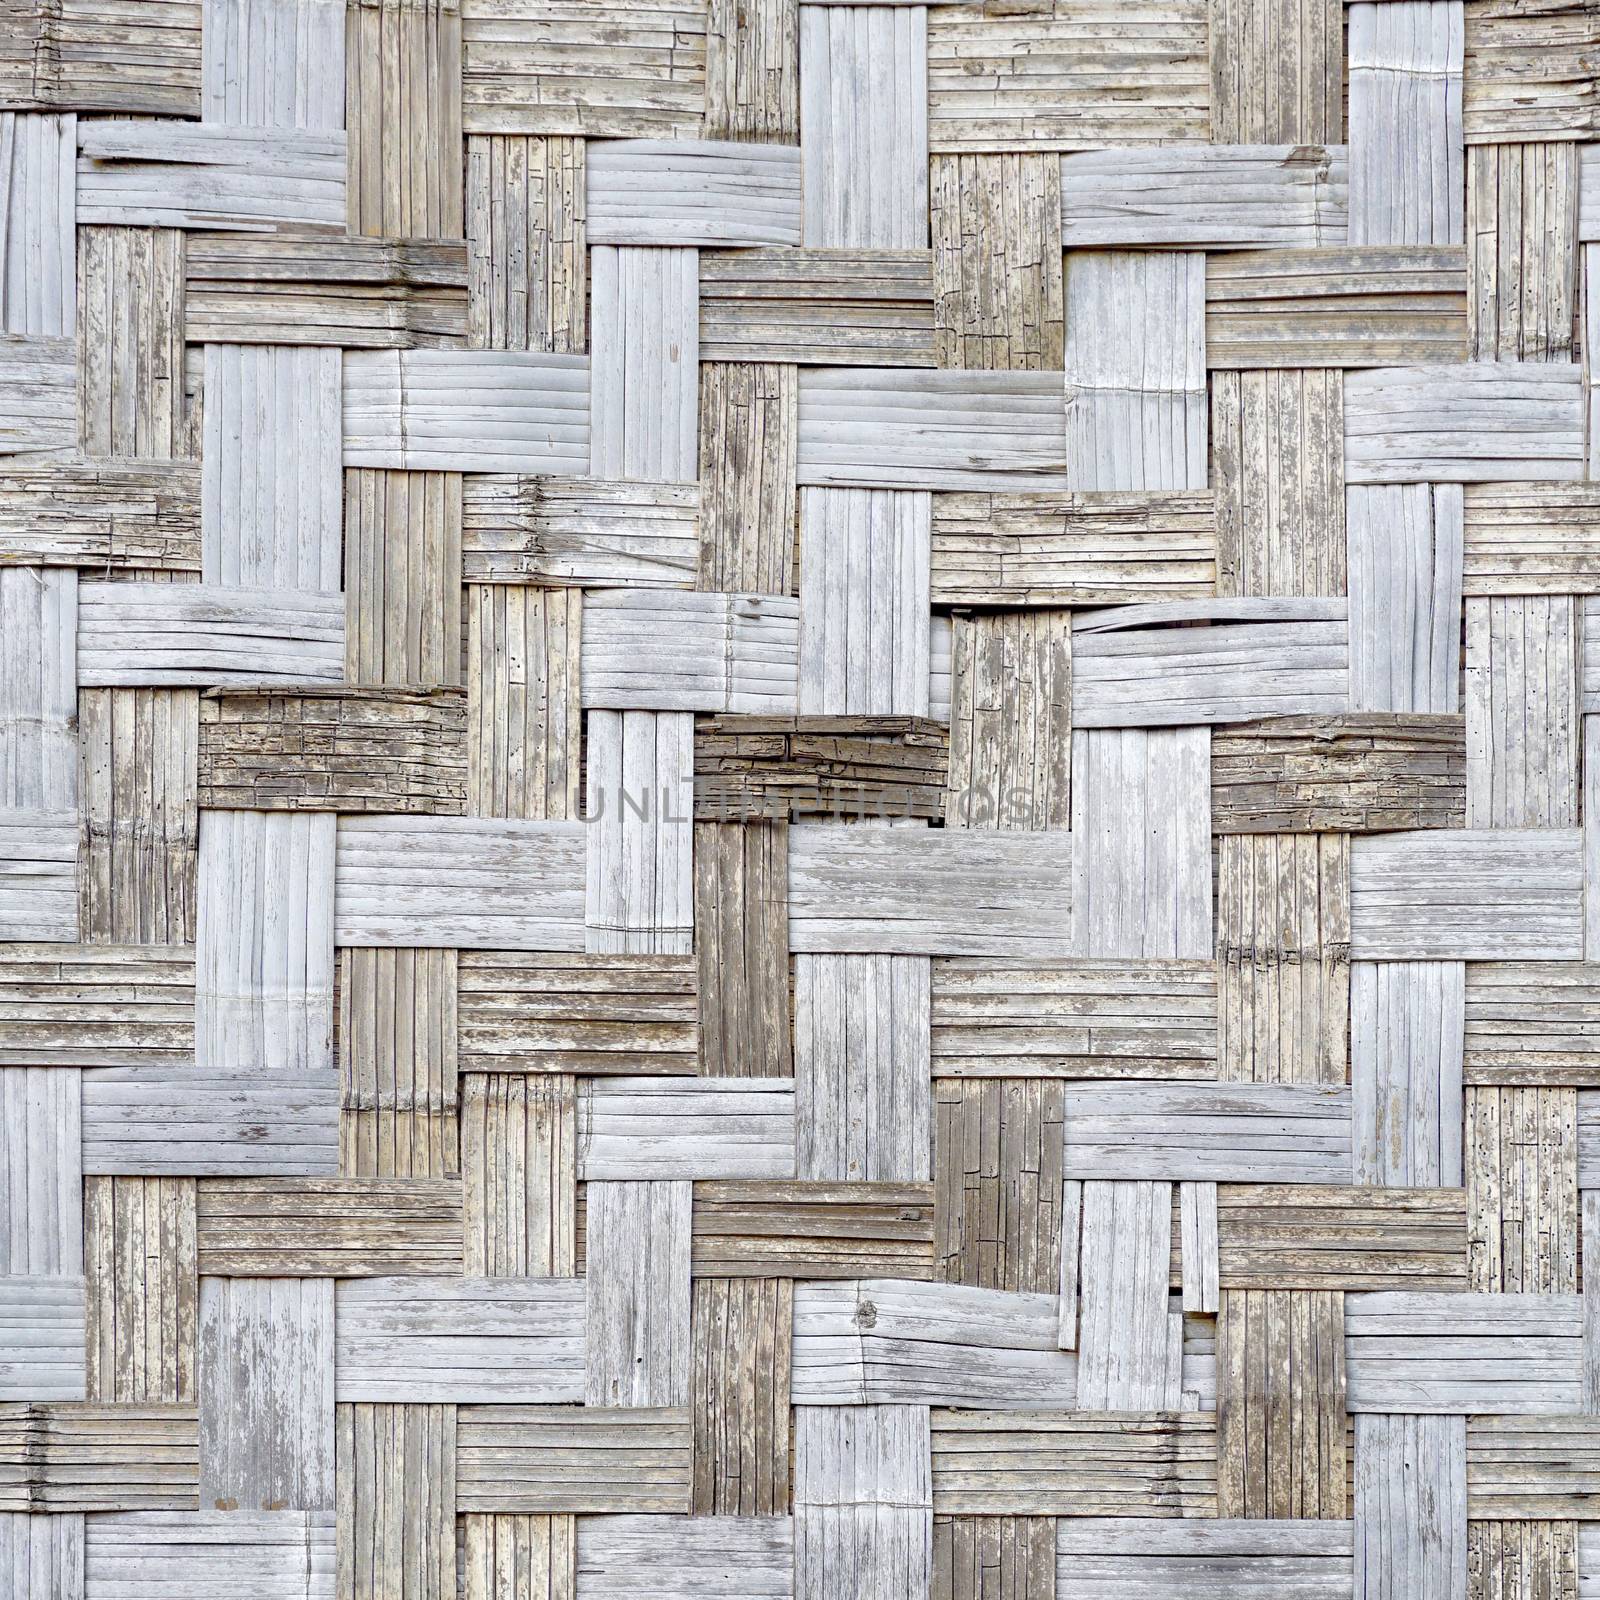 Wall of plaited bamboo strips square vernecular outdoor in Laos